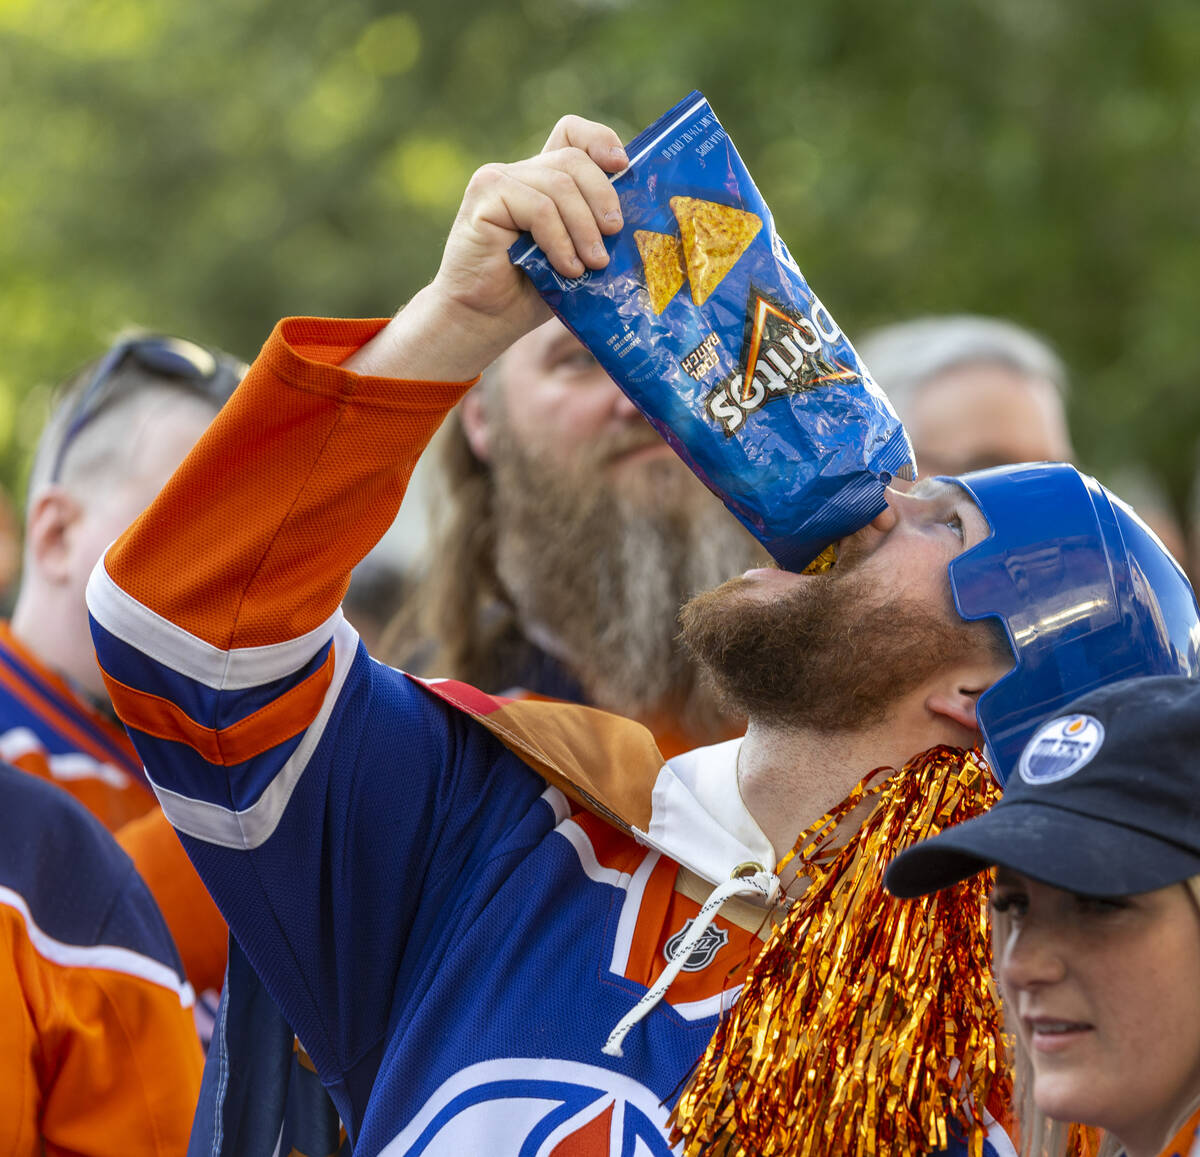 An Edmonton Oilers fan enjoys some Doritos outside before facing the Golden Knights in Game 5 o ...